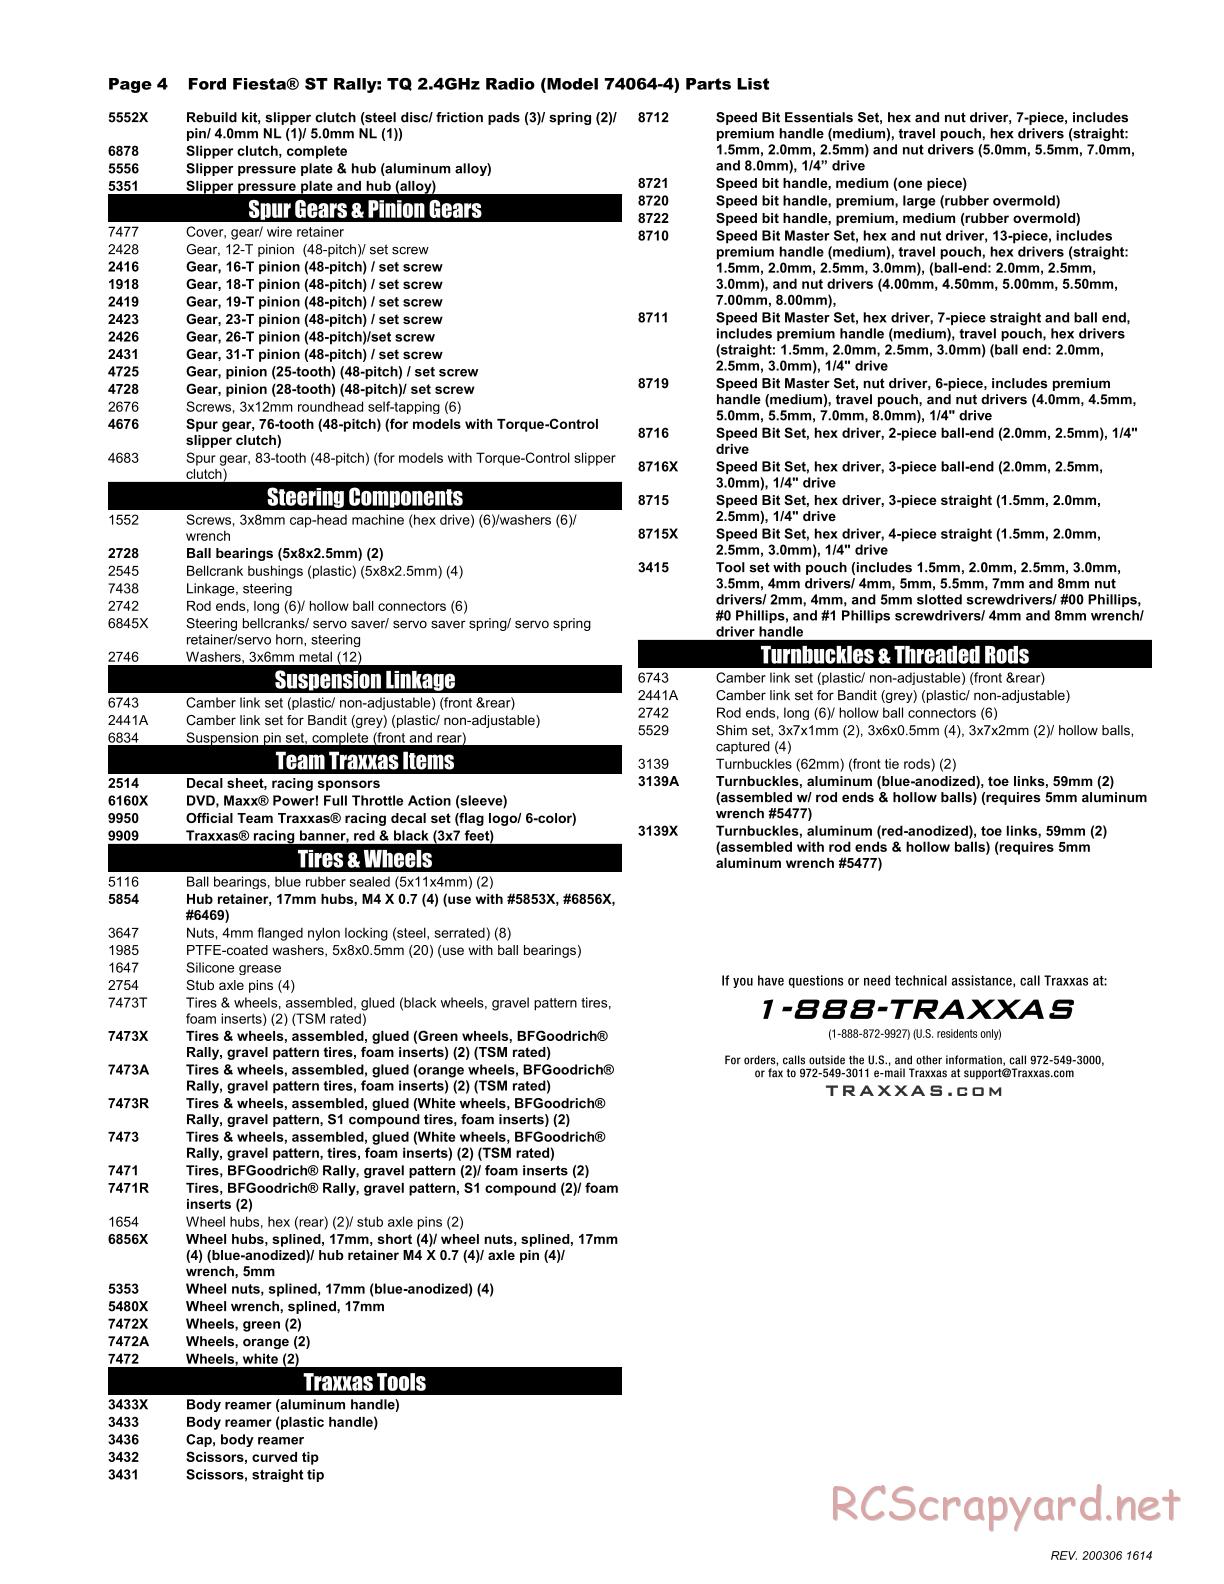 Traxxas - VR46 Ford Fiesta ST Rally SE (2018) - Parts List - Page 4